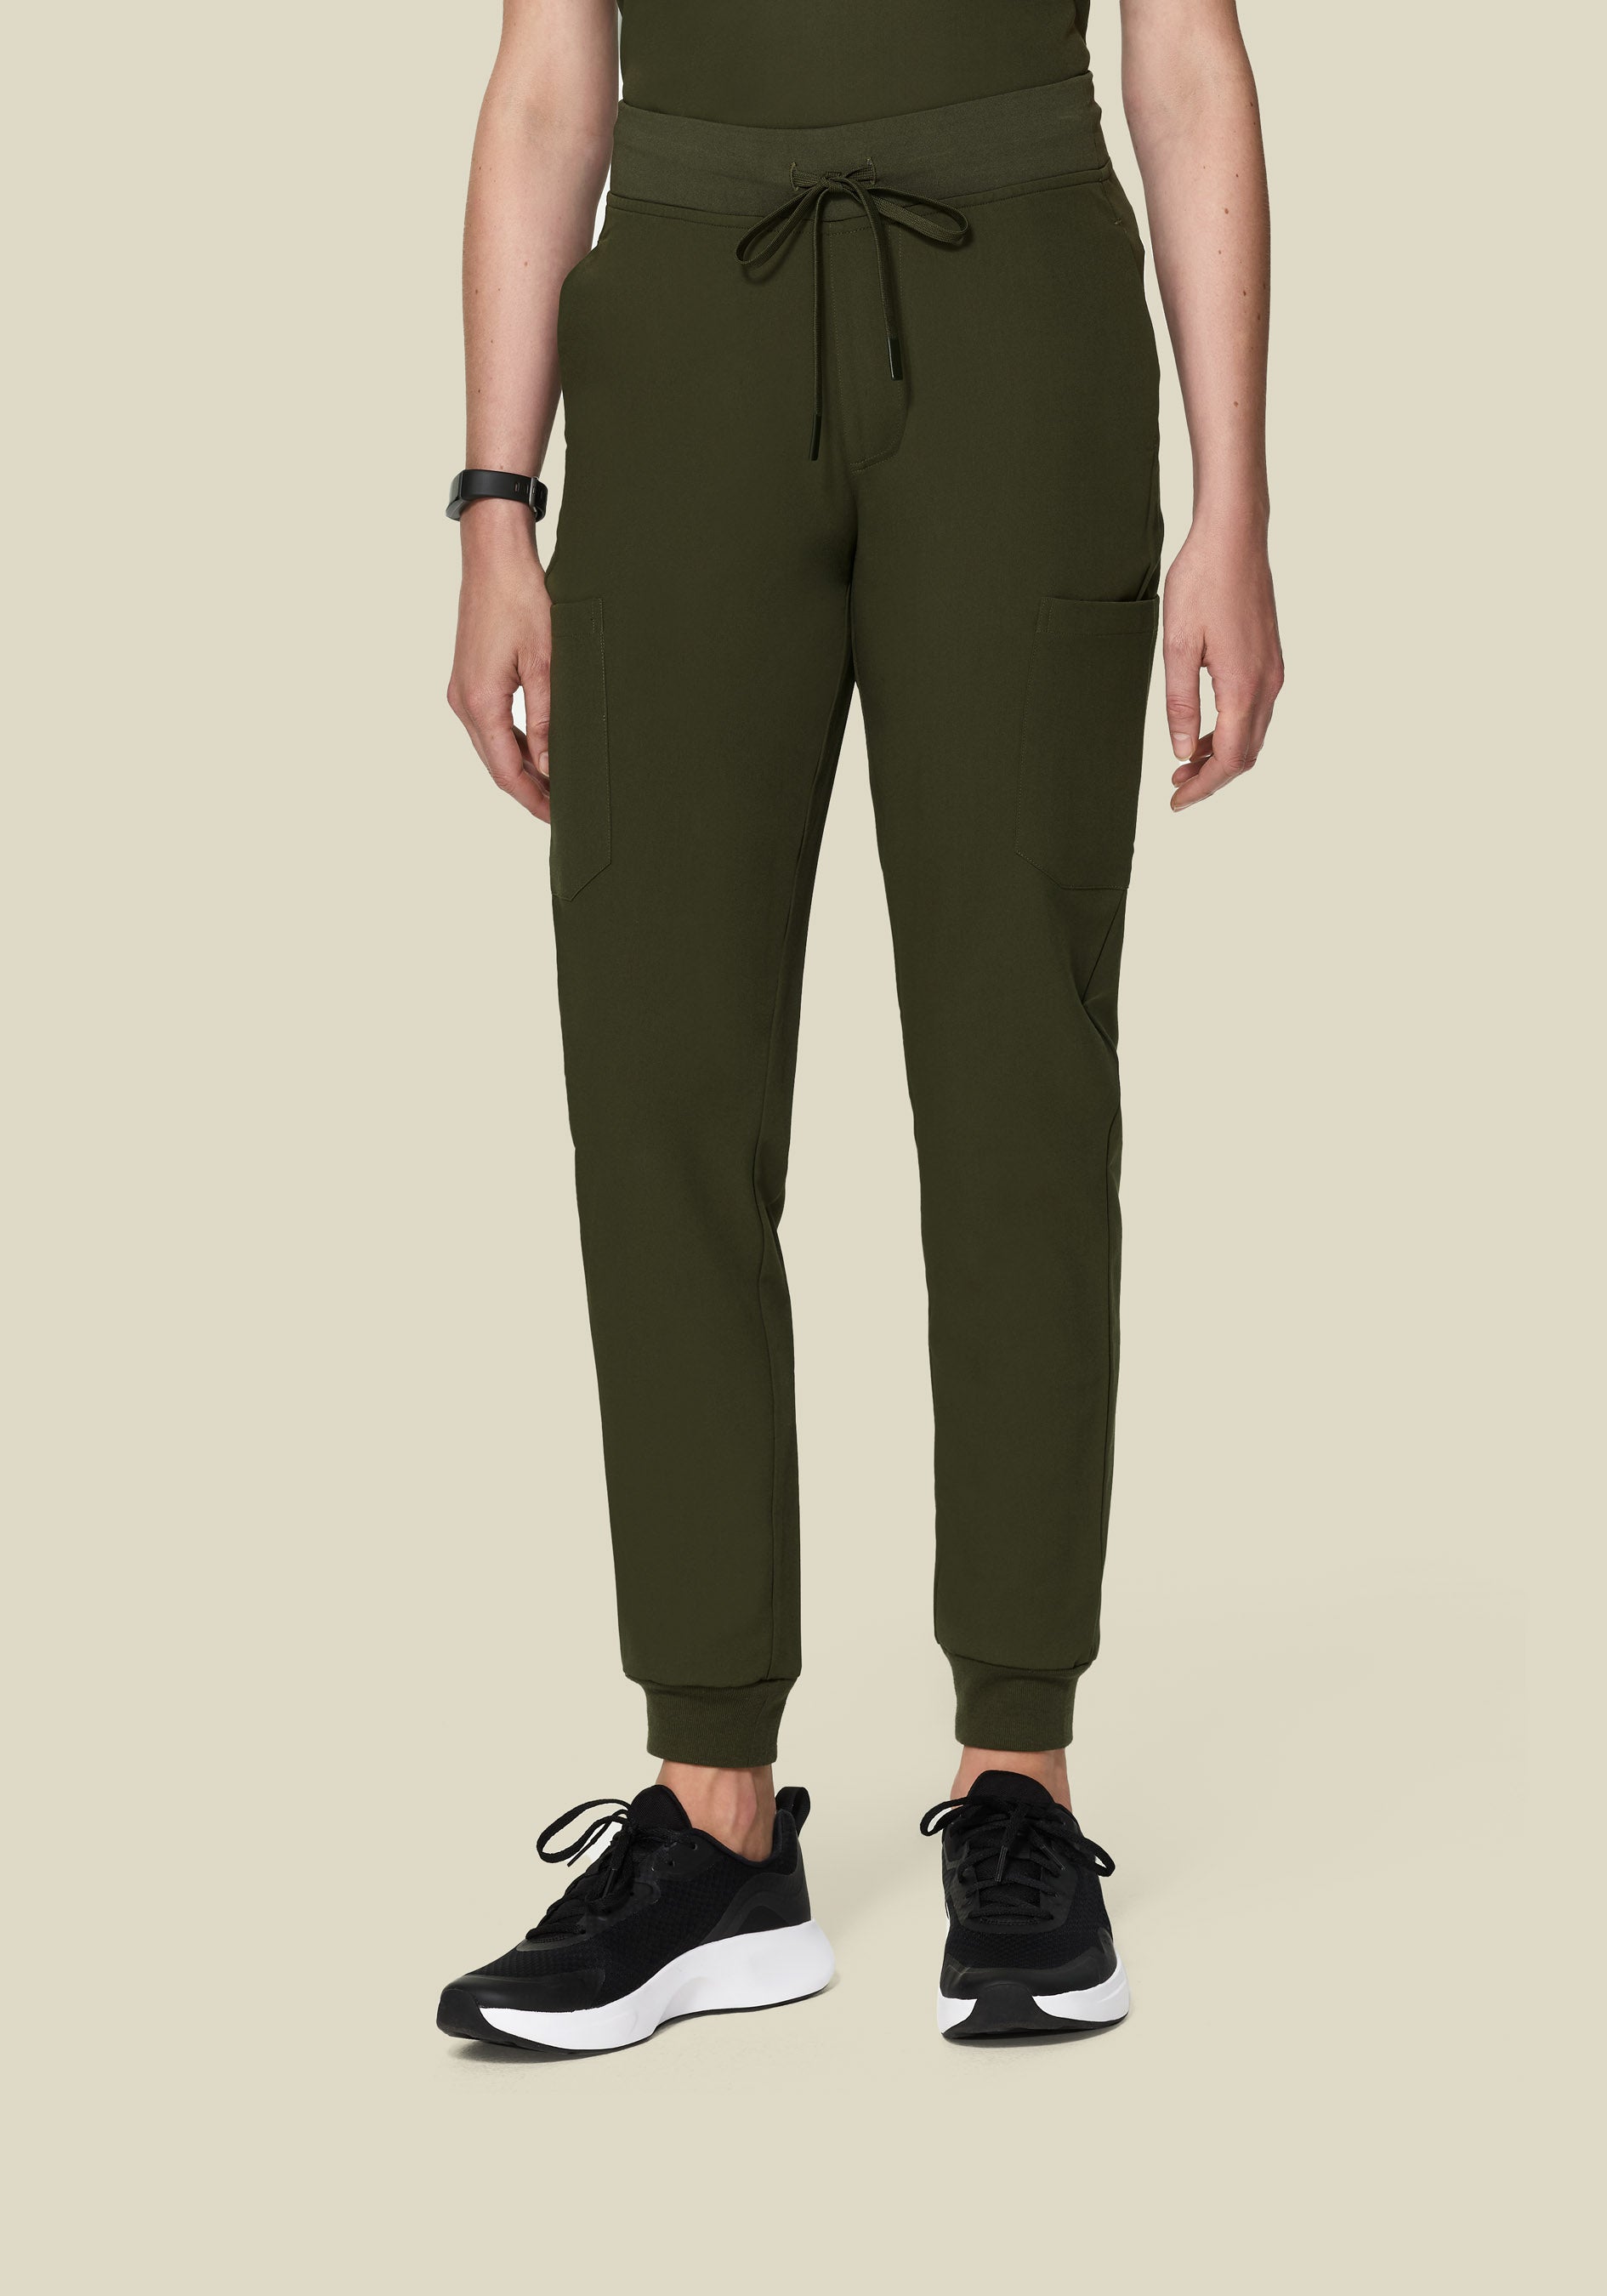 Plant Dyed Organic Cuffed Joggers in Olive Green – TOBEFRANK